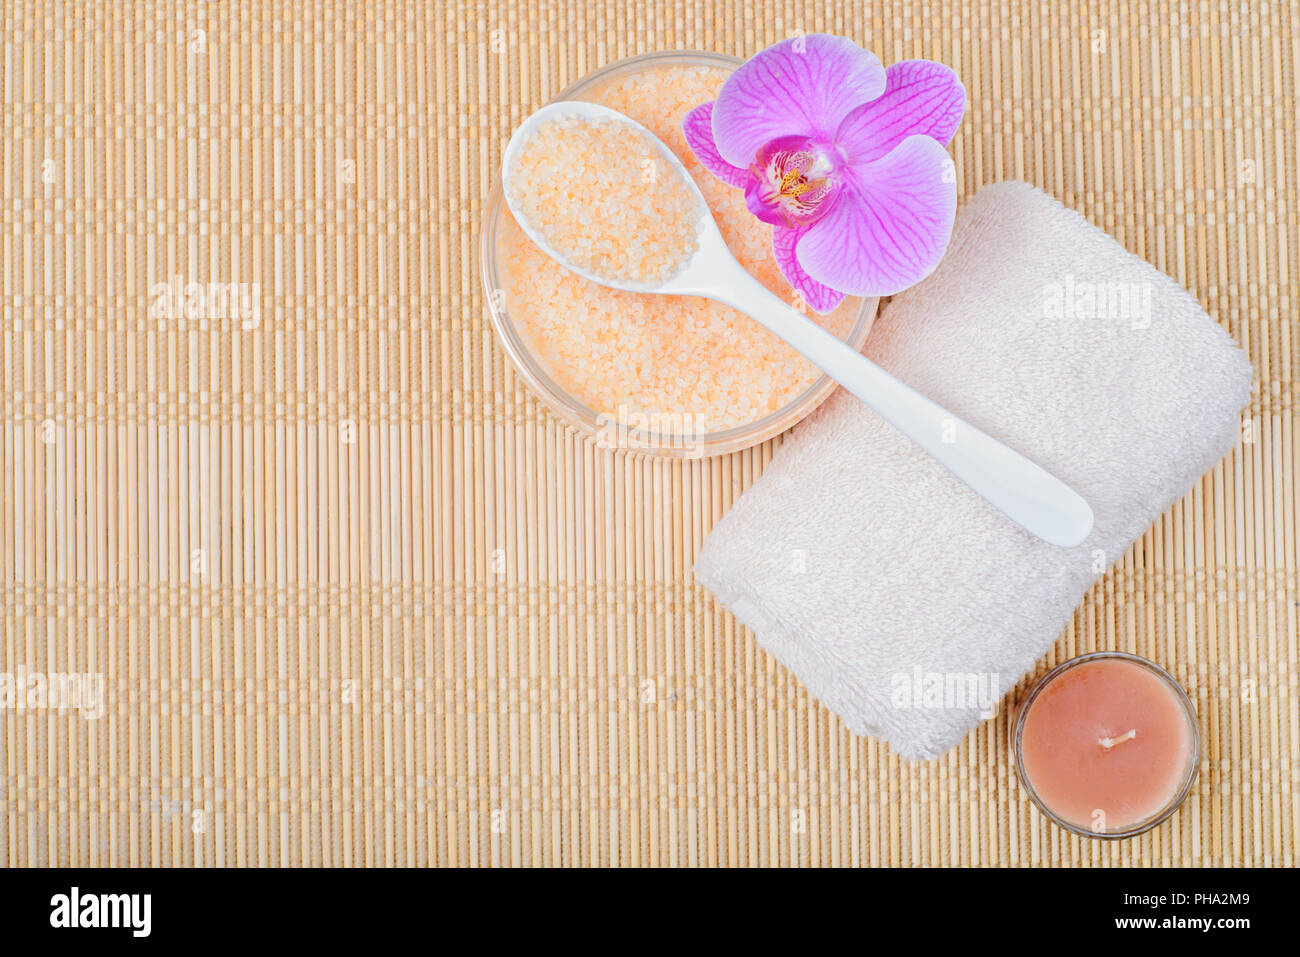 Kit body care, accessories for Spa on a bamboo mat Stock Photo